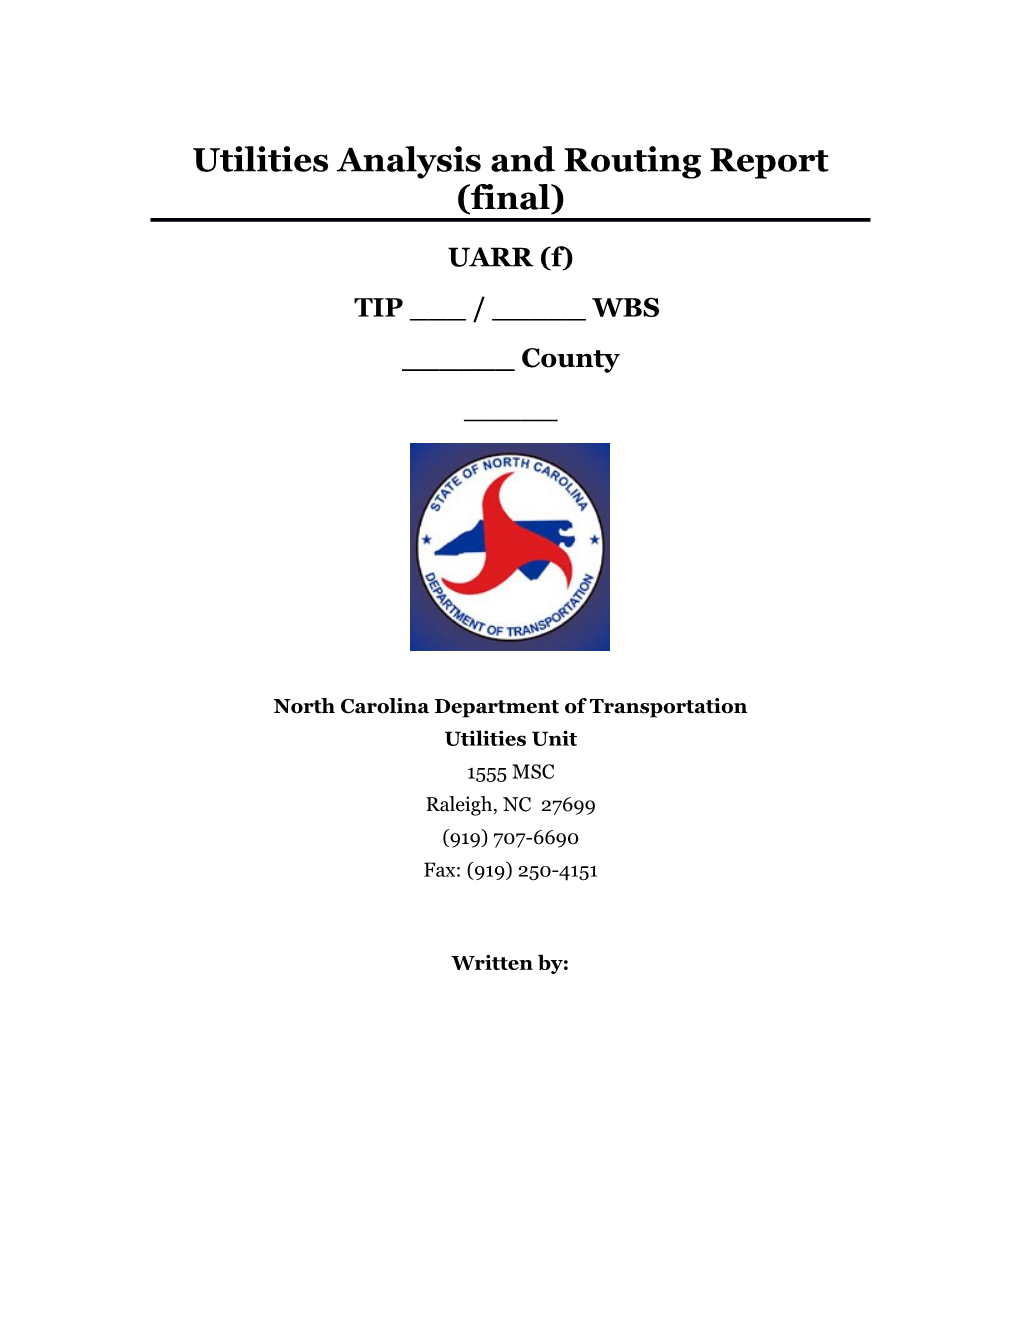 Utility Analysis and Routing Report- Final (Template)